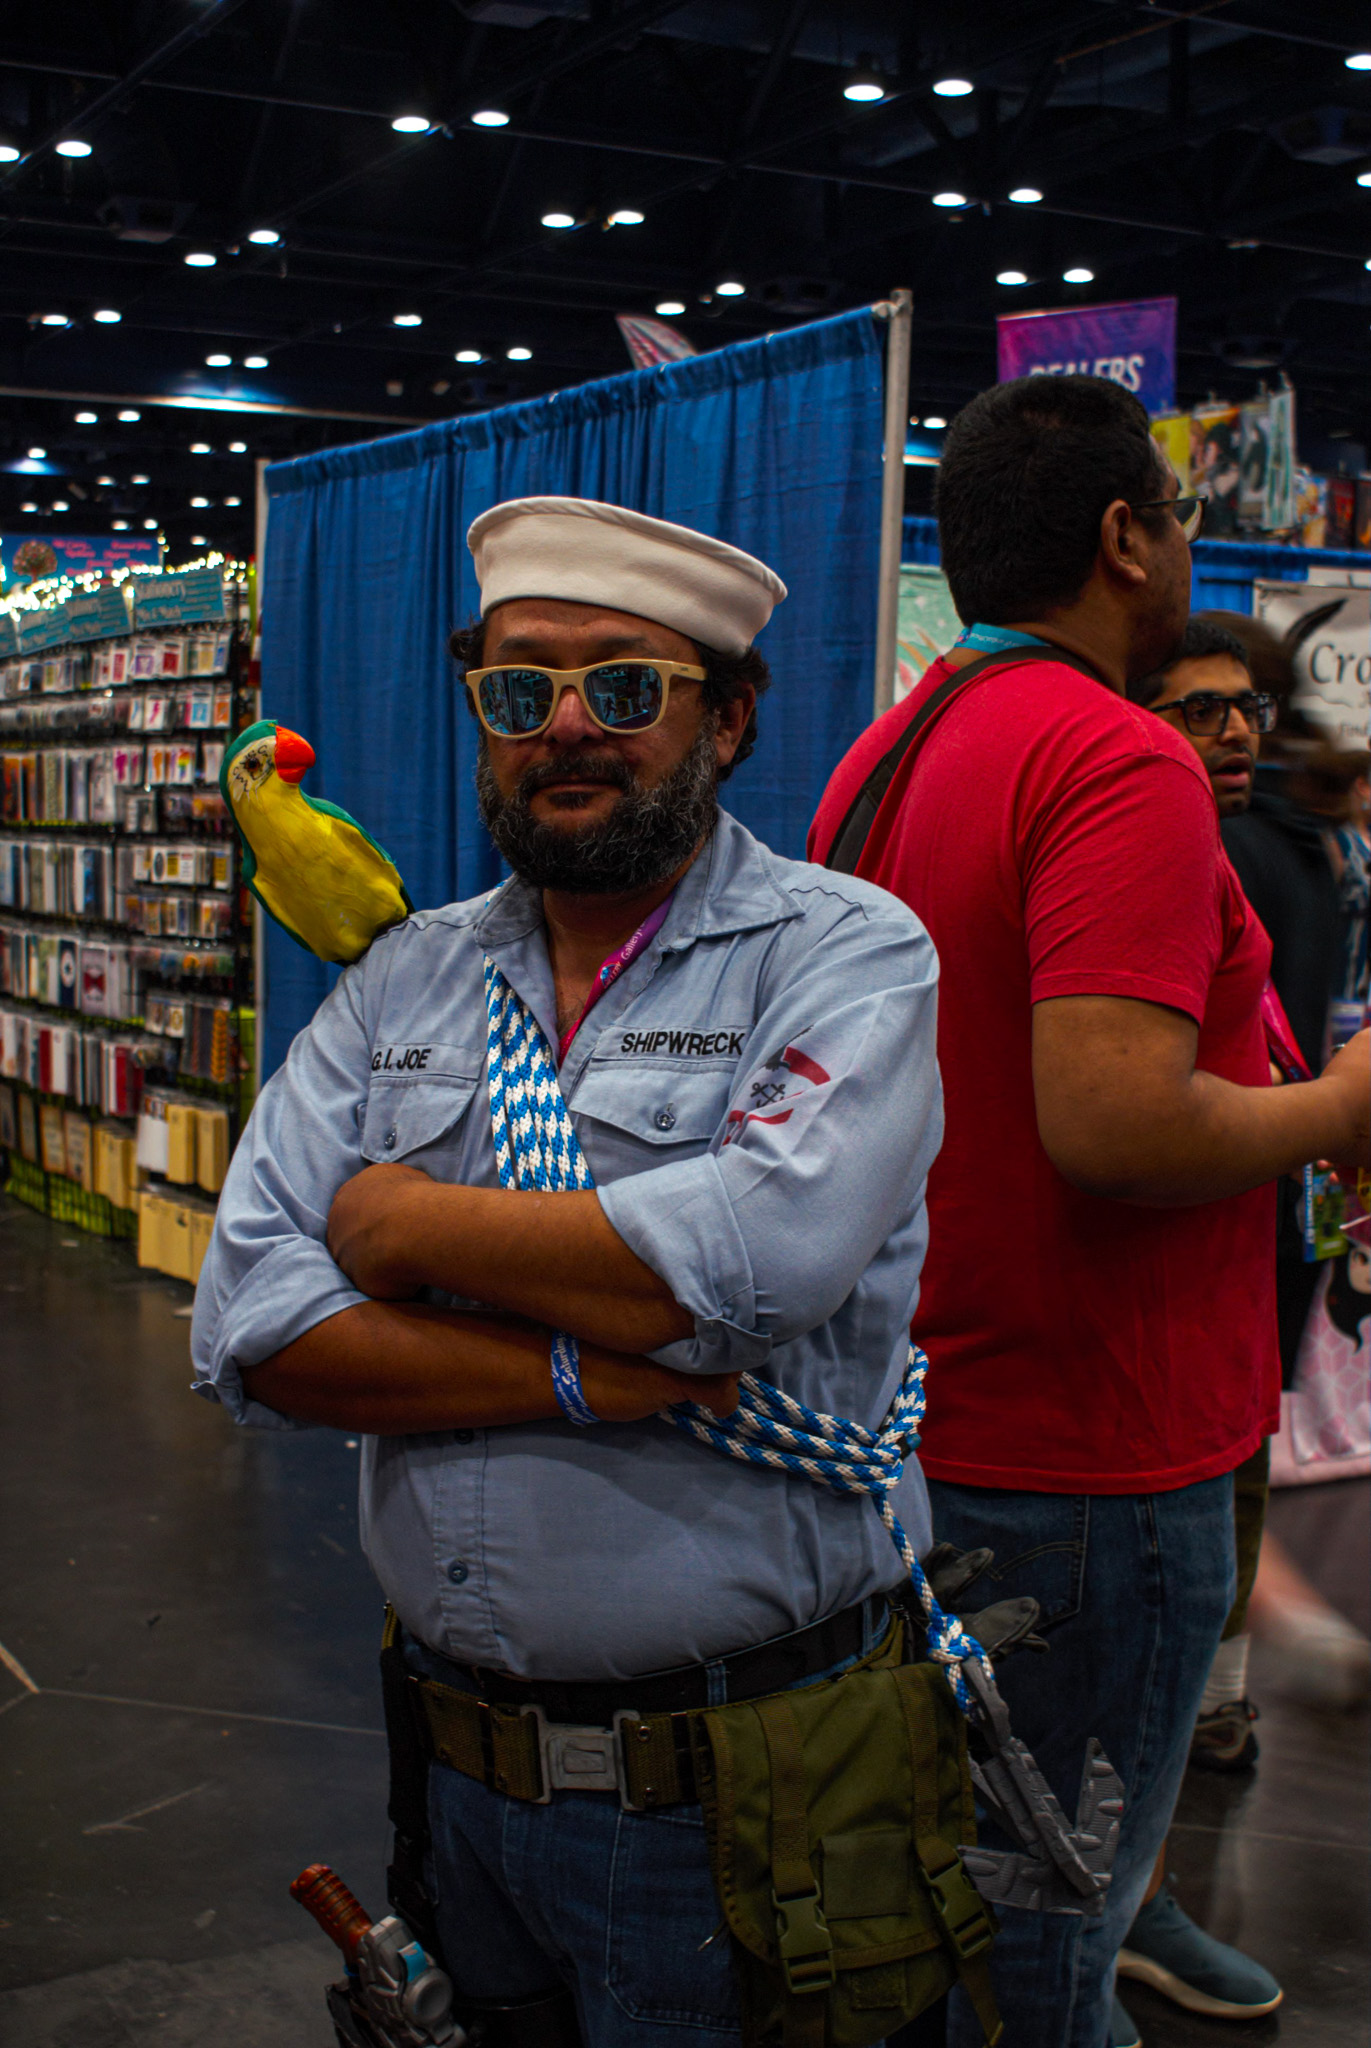 Rick Rameriz is here at Comicpalooza for his third year. He is cosplaying as Shipwreck from the series GI Joe. Rick told me he was here to watch his children participate in the cosplay contest. Photo by reporter Adan Martinez.